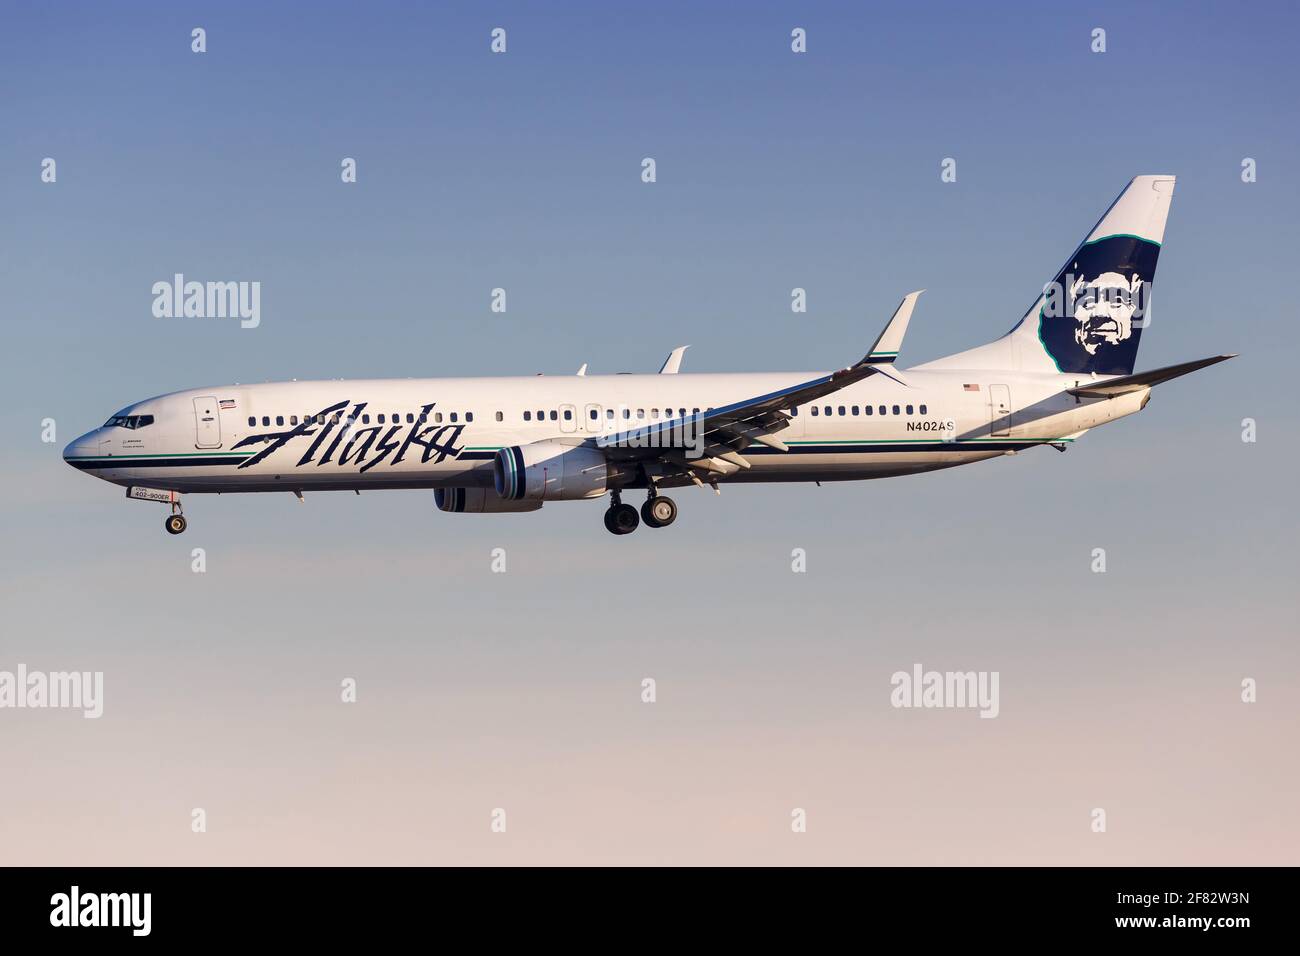 Los Angeles, USA – 21. February 2016: Alaska Airlines Boeing 737-900 at Los Angeles airport (LAX) in the United States. Boeing is an aircraft manufact Stock Photo